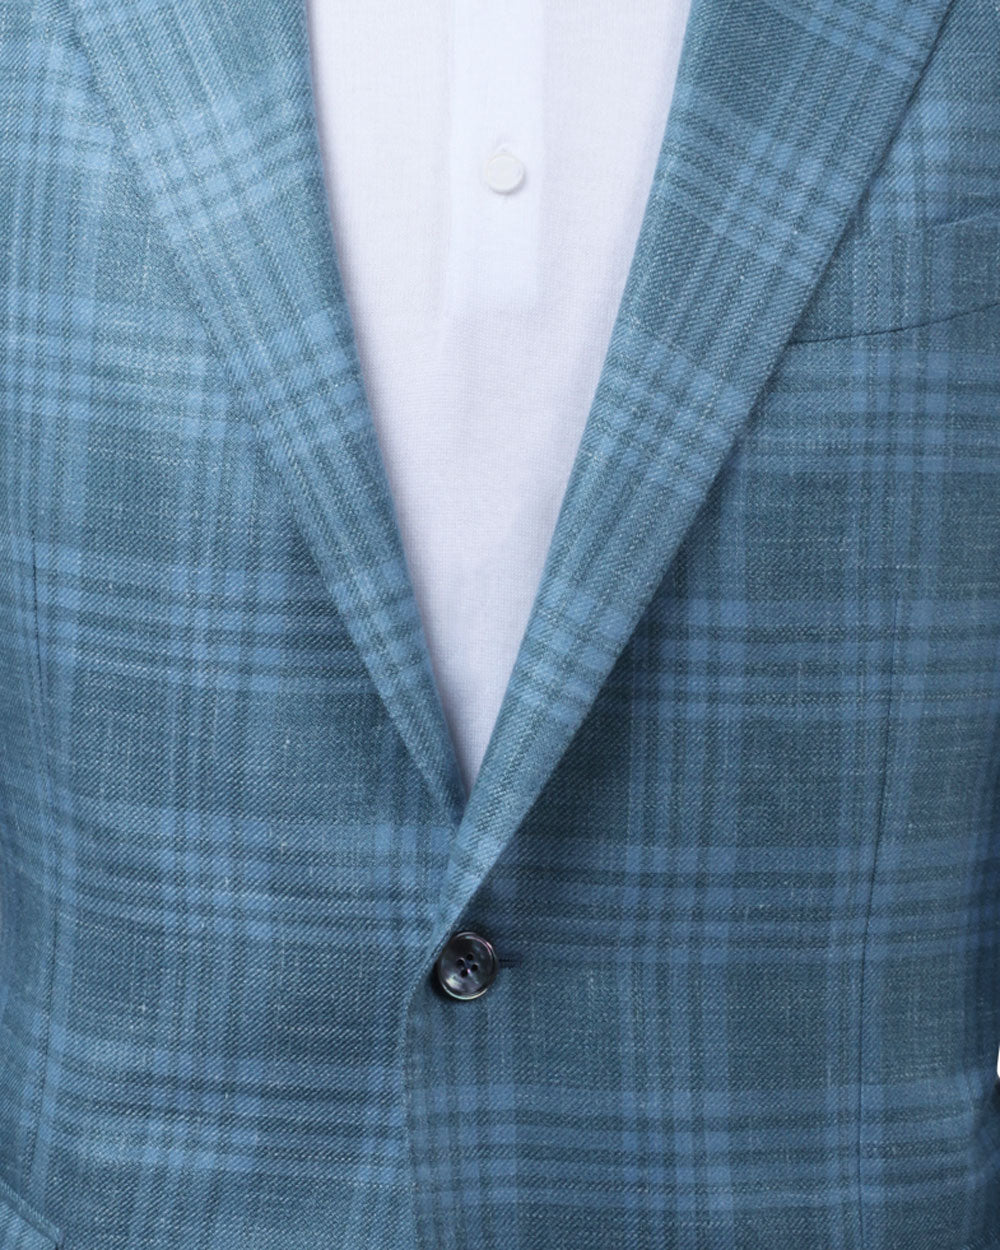 Light Teal Check Sportcoat